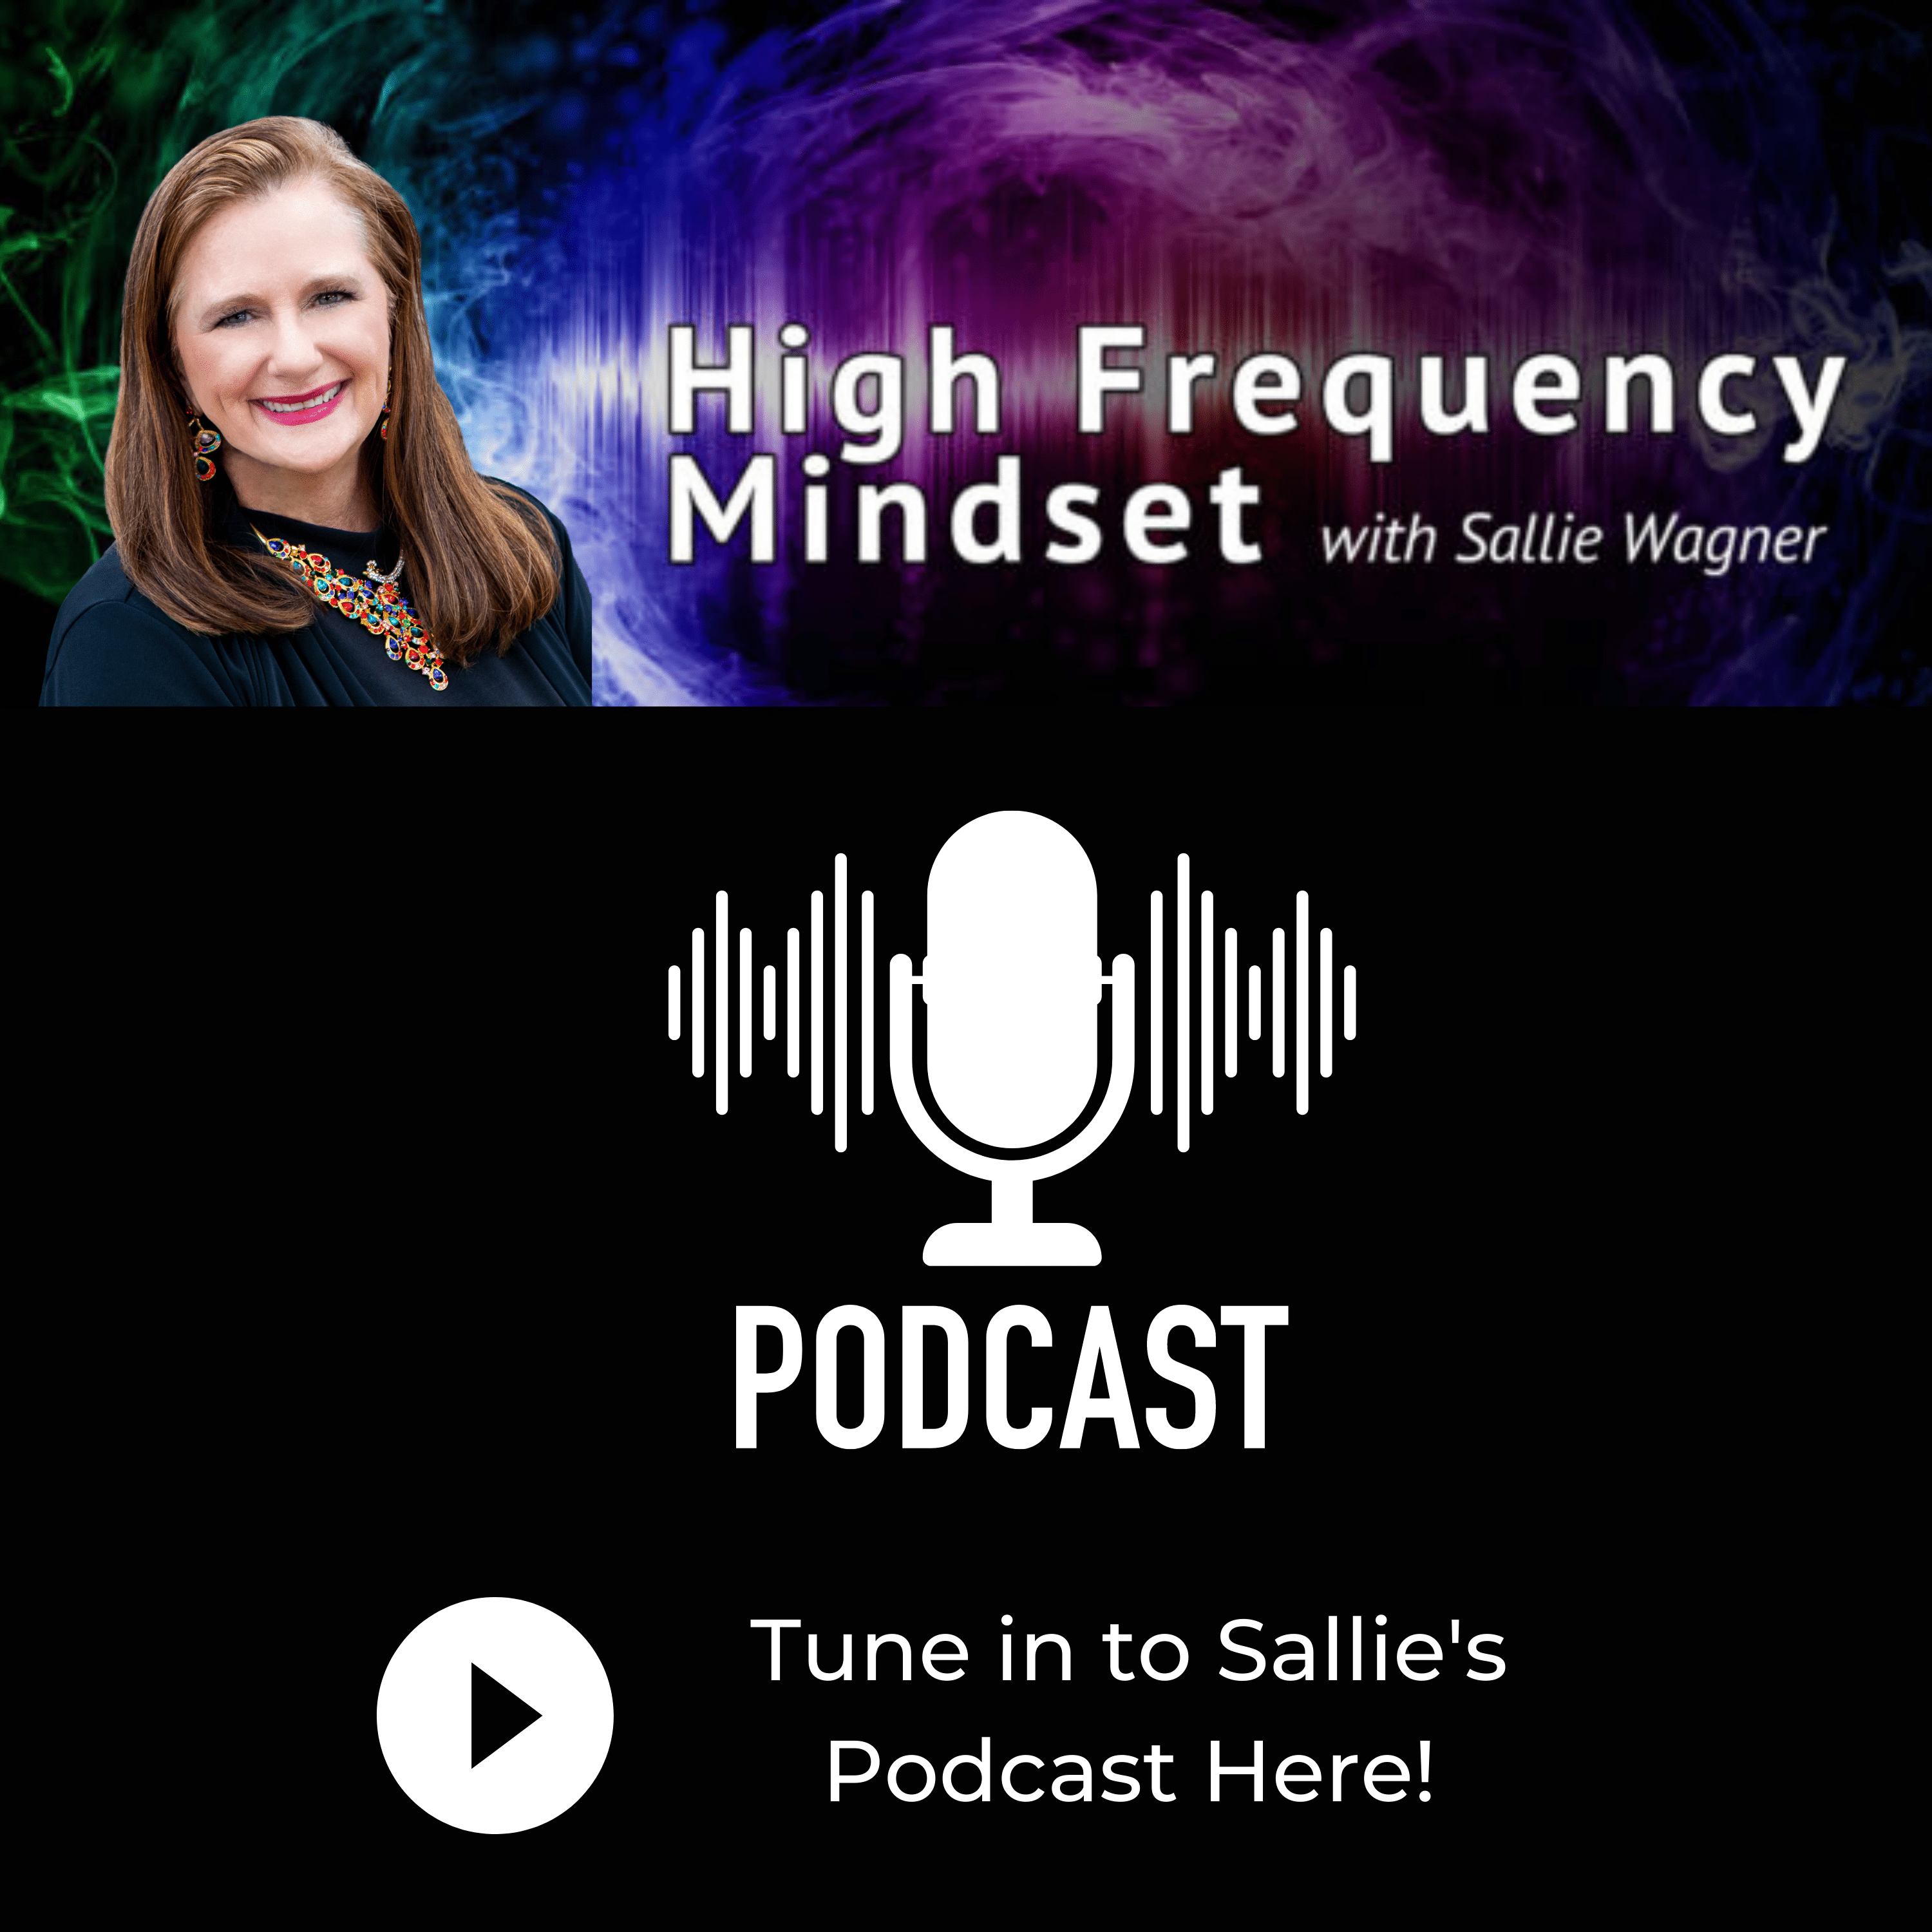 High Frequency Mindset Podcast Promo for ILC Website